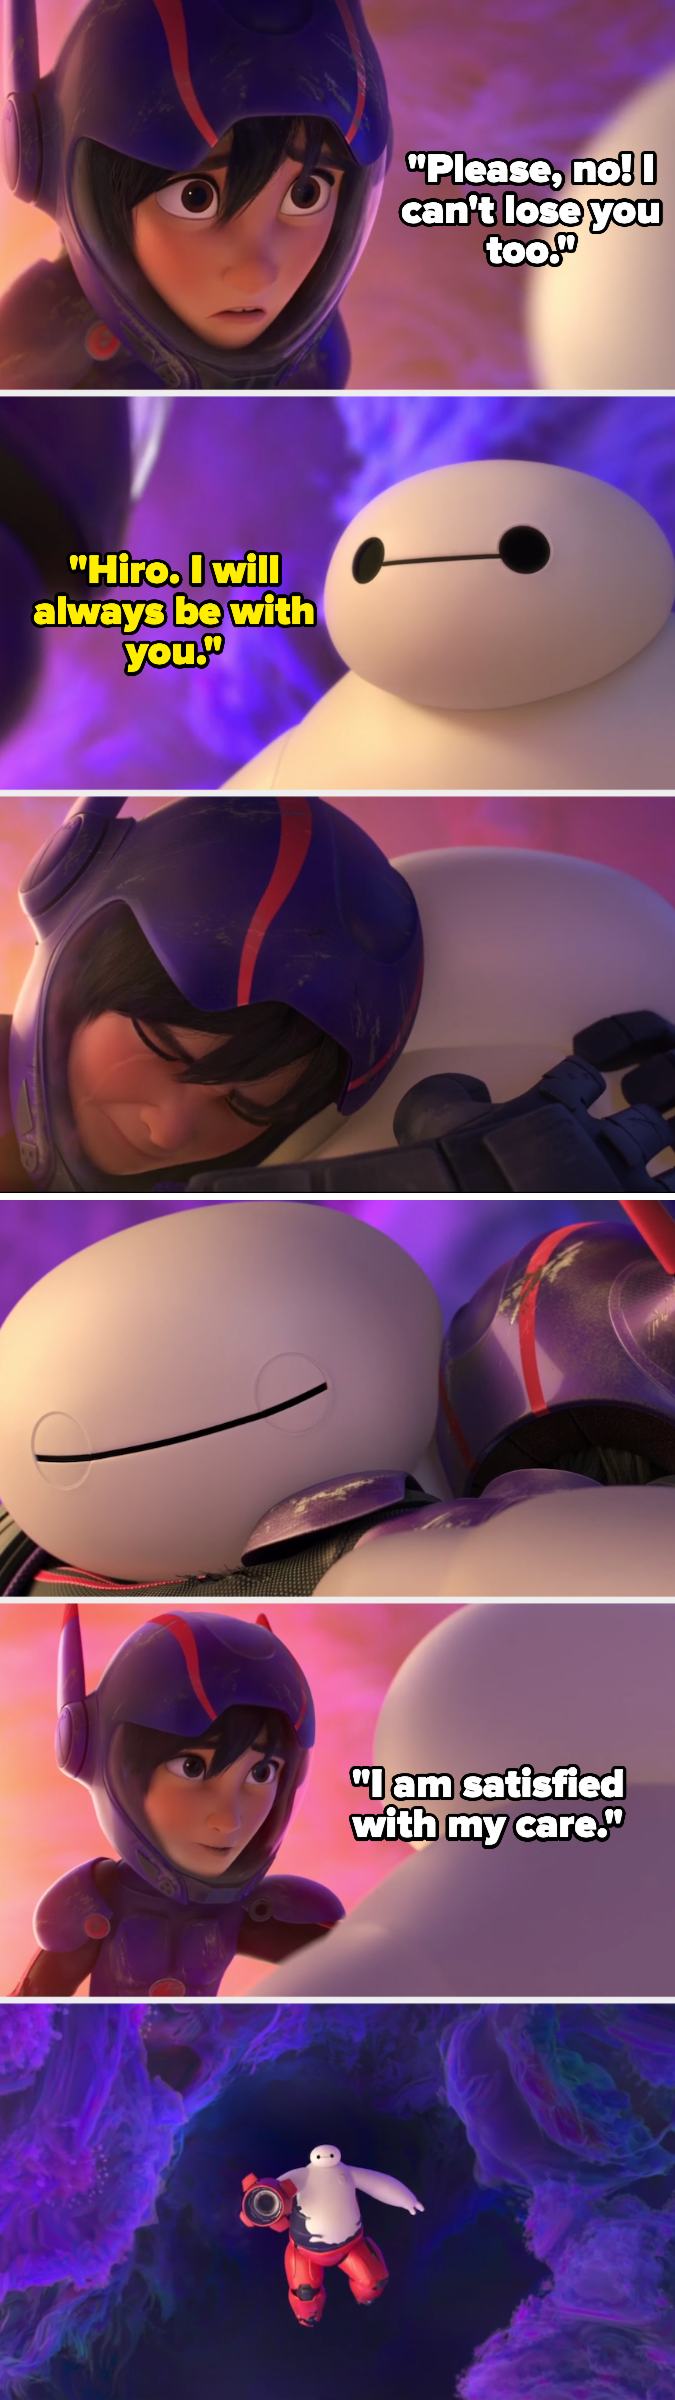 Hiro tells Baymax he is satisfied with his care, and Baymax drifts off into space